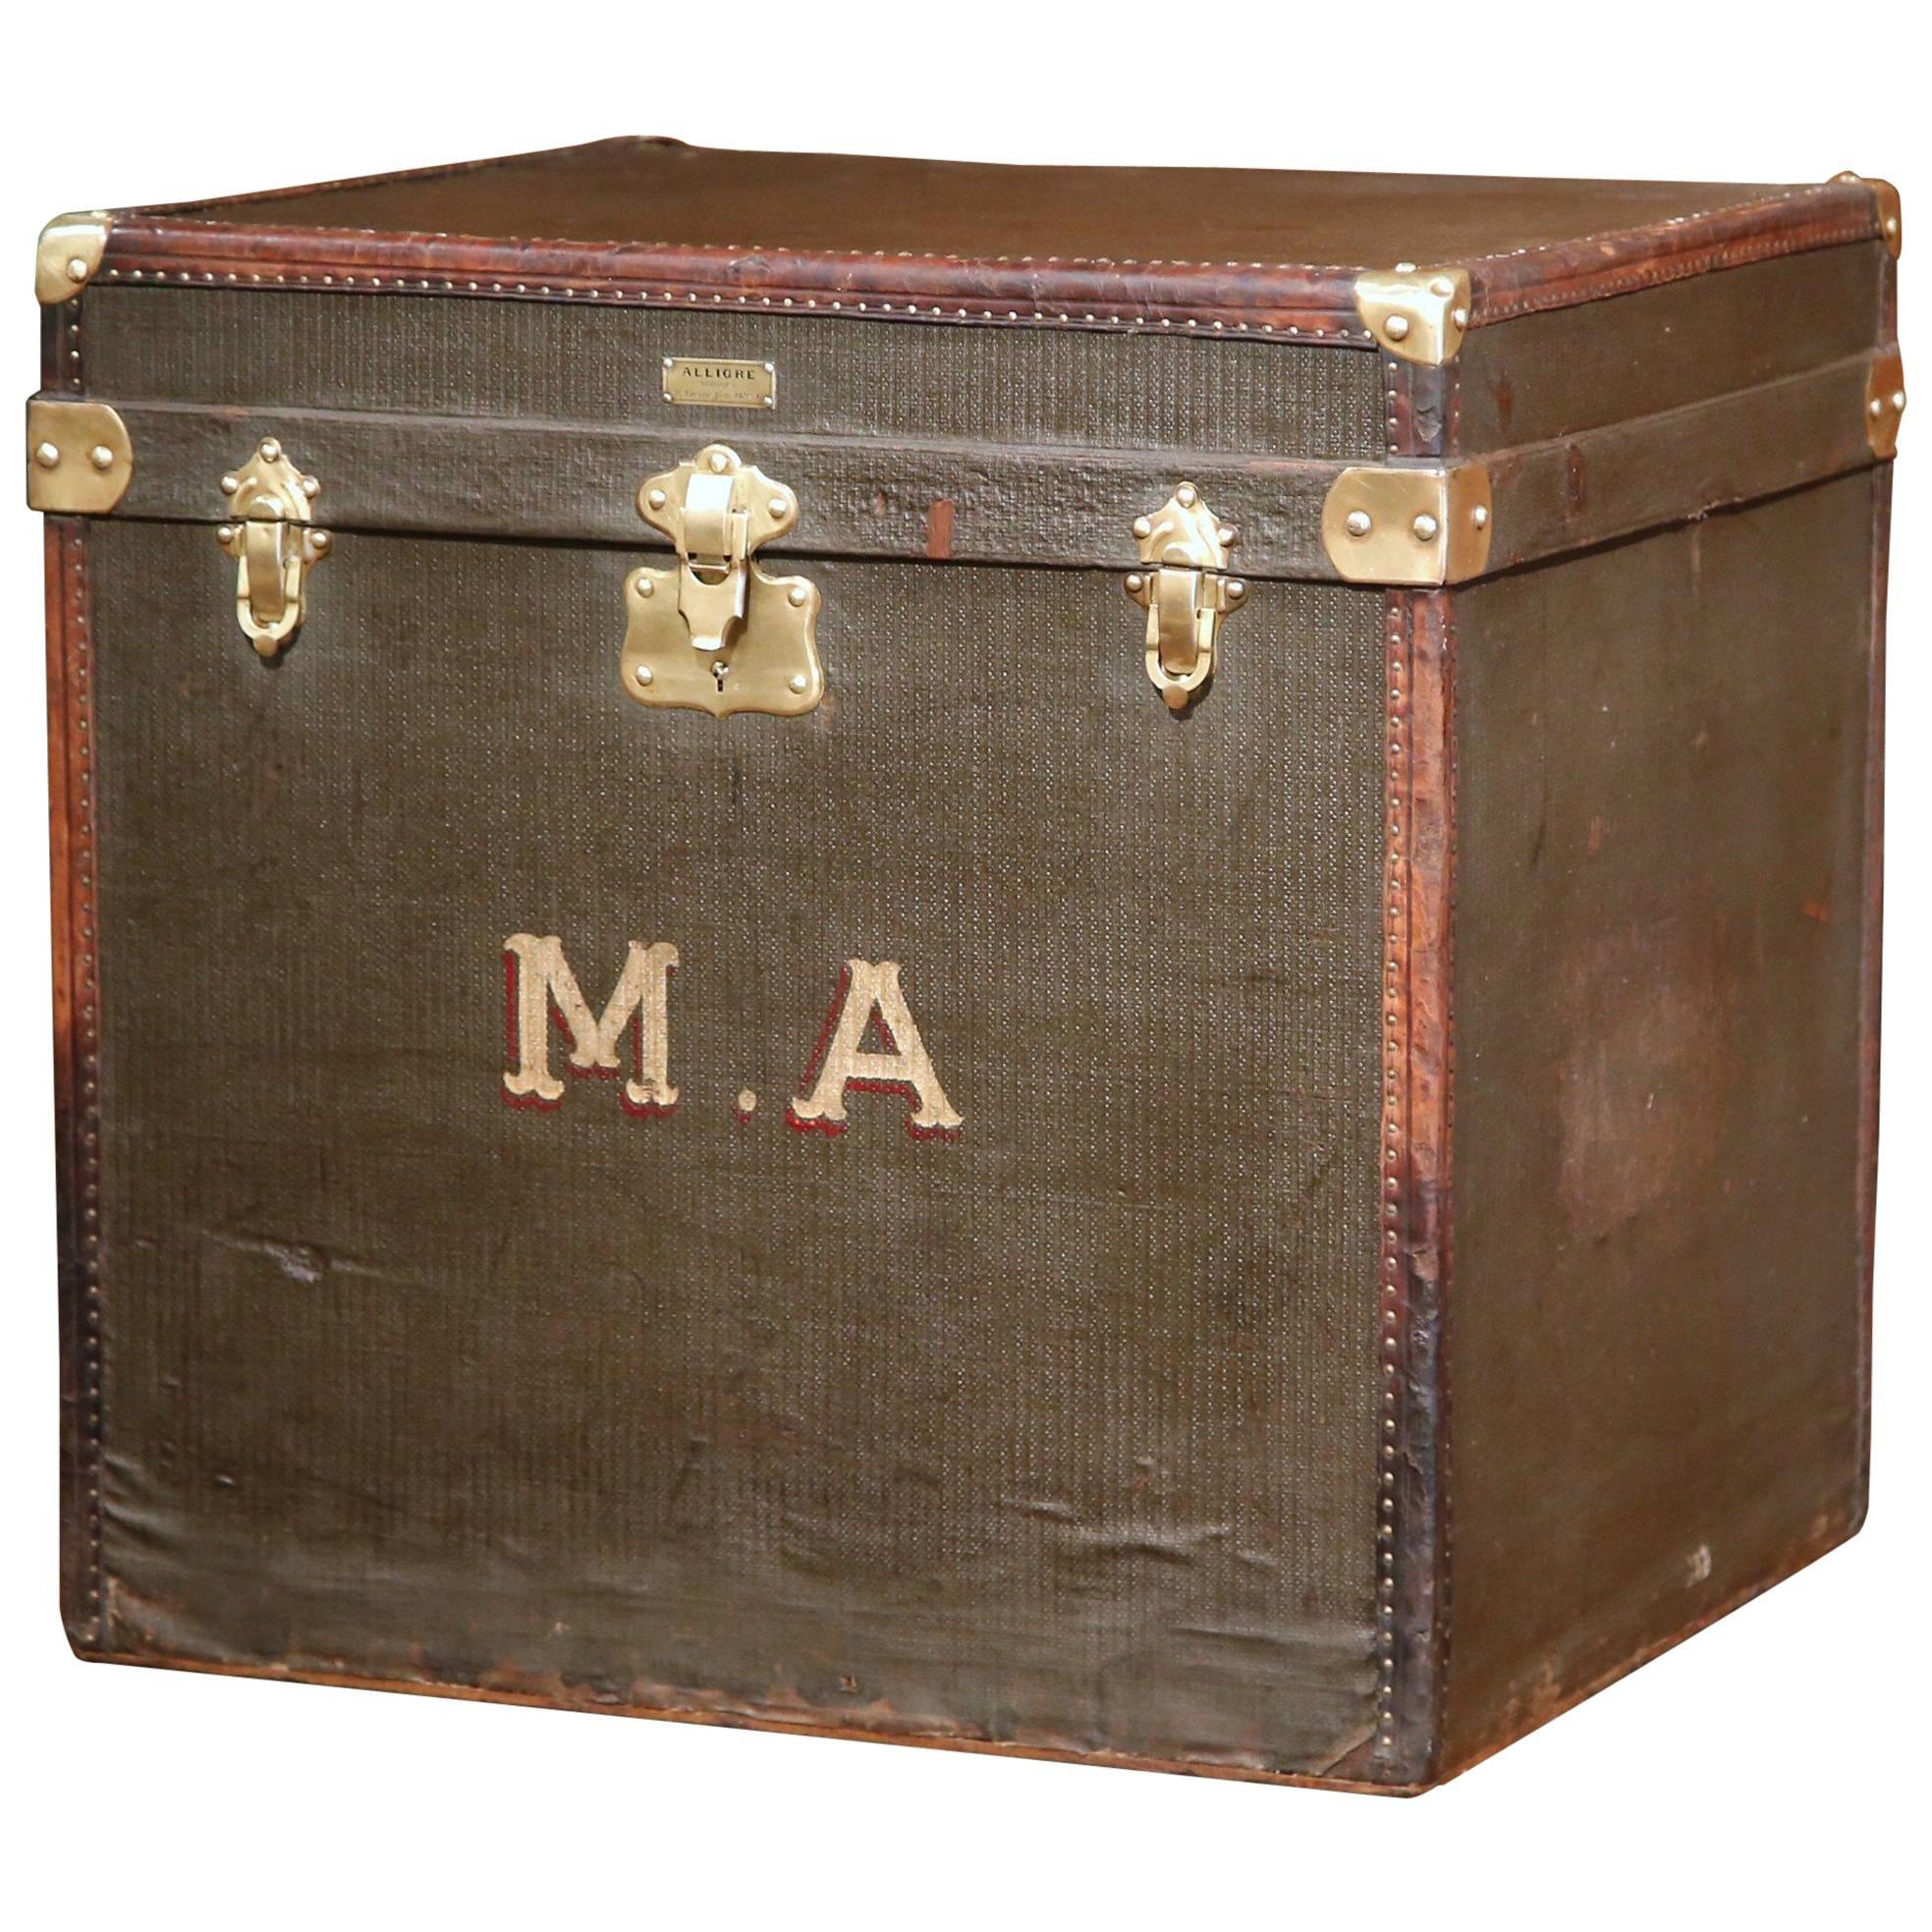 19th Century French Leather and Brass Trunk Luggage Signed Alligre Paris